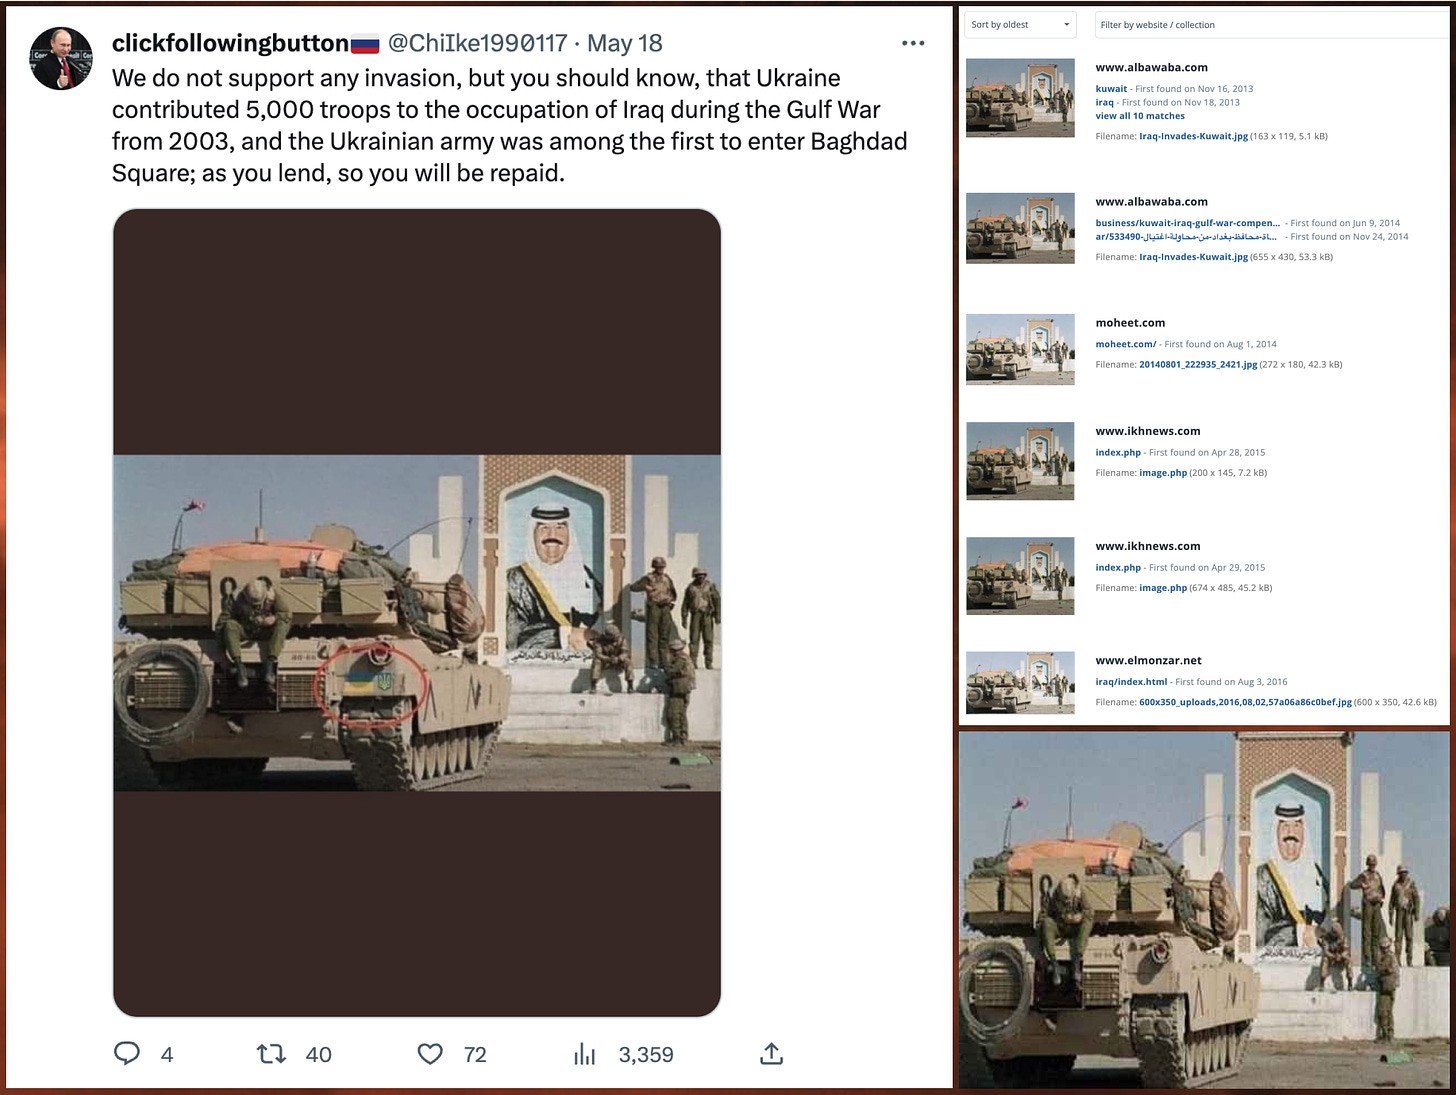 screenshot of @ChiIke1990117 tweet and reverse image searches showing that the original version of the photo does not contain a Ukrainian flag